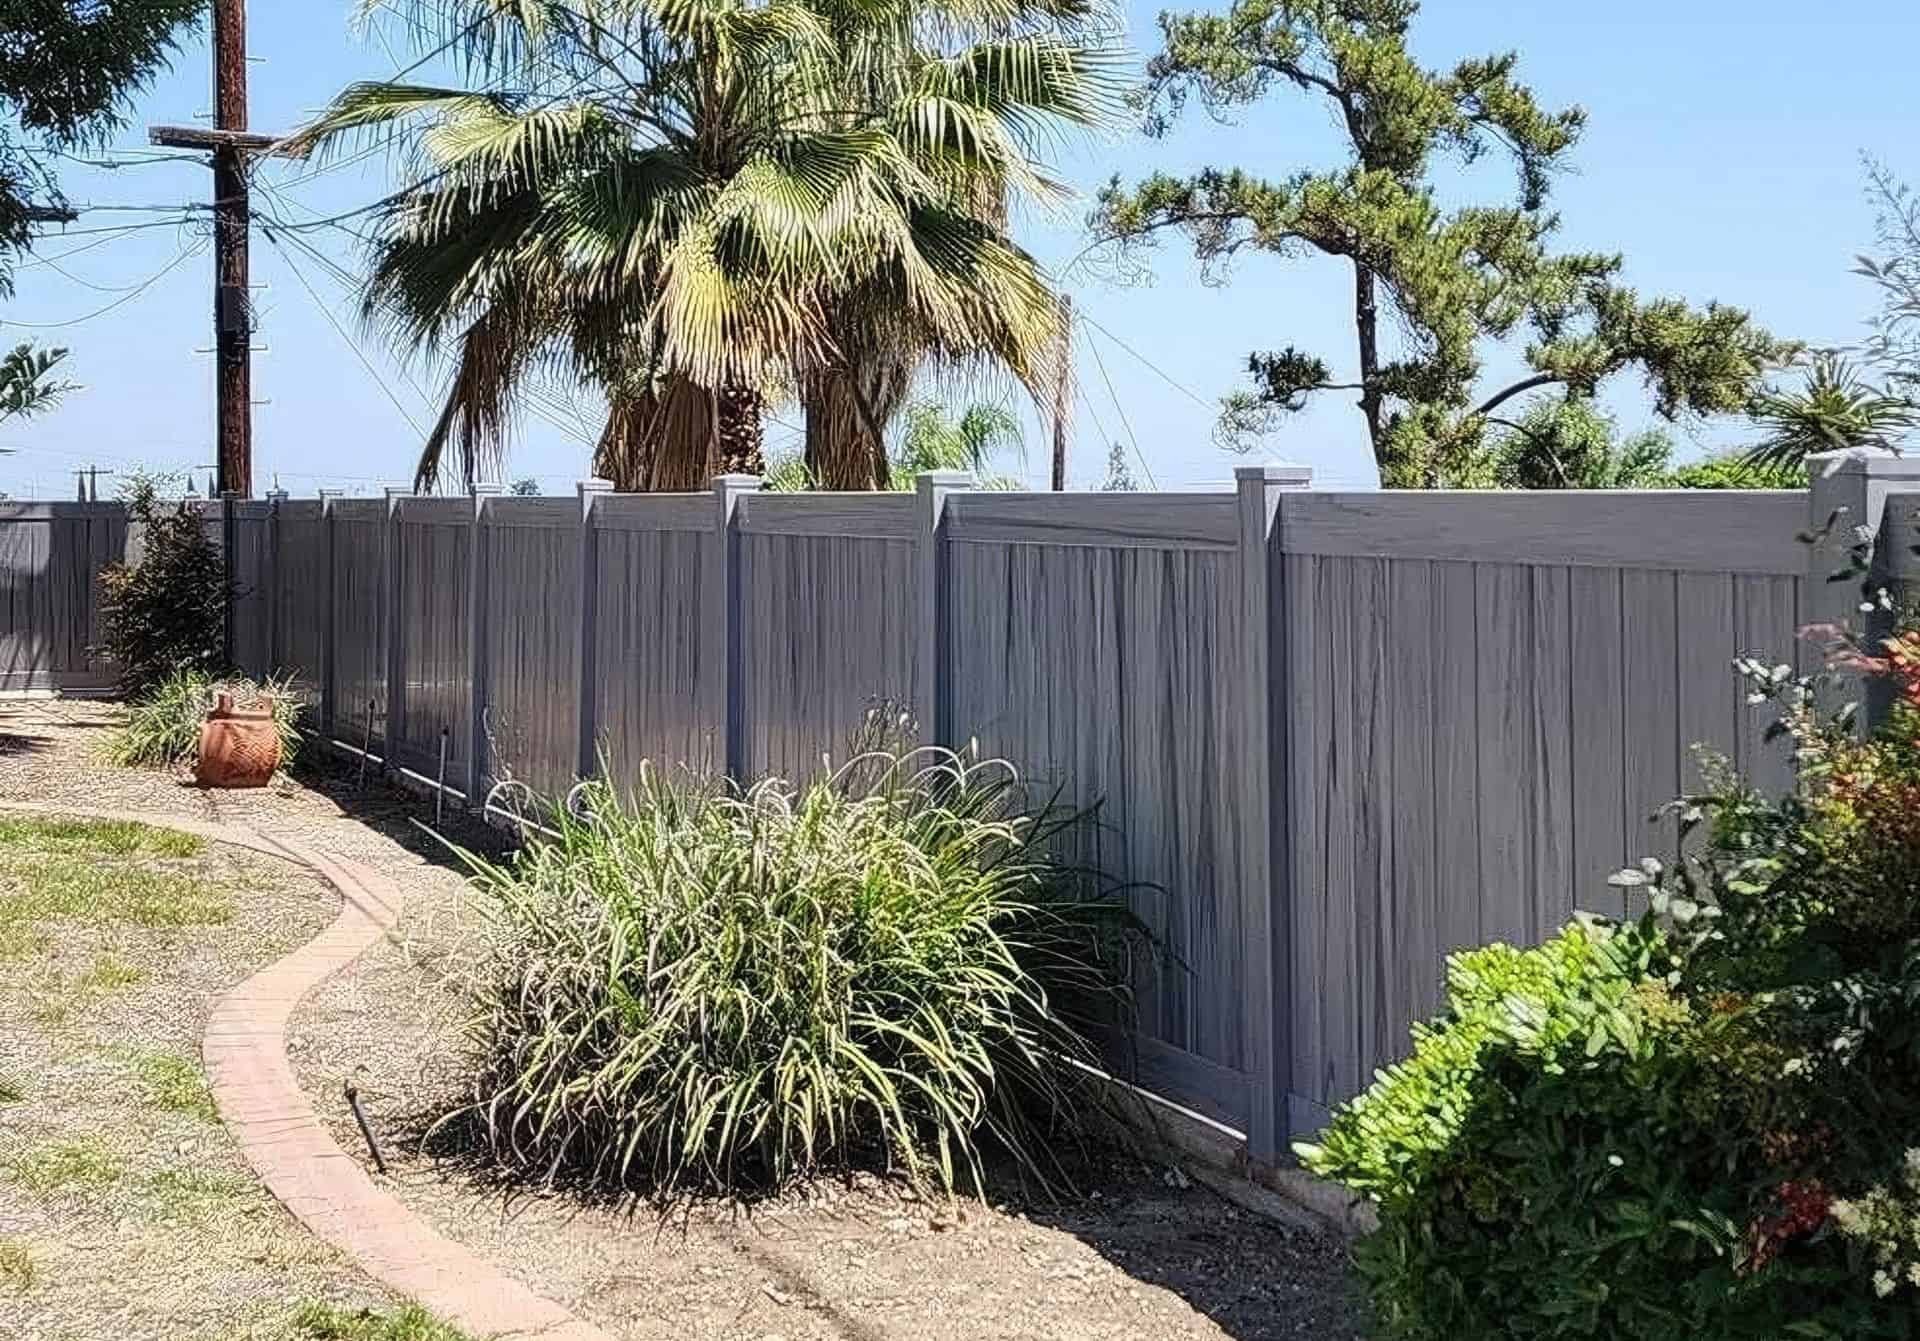 Vinyl privacy vertical fence with realistic grey paint and red brick borders around grassy lawn in front.